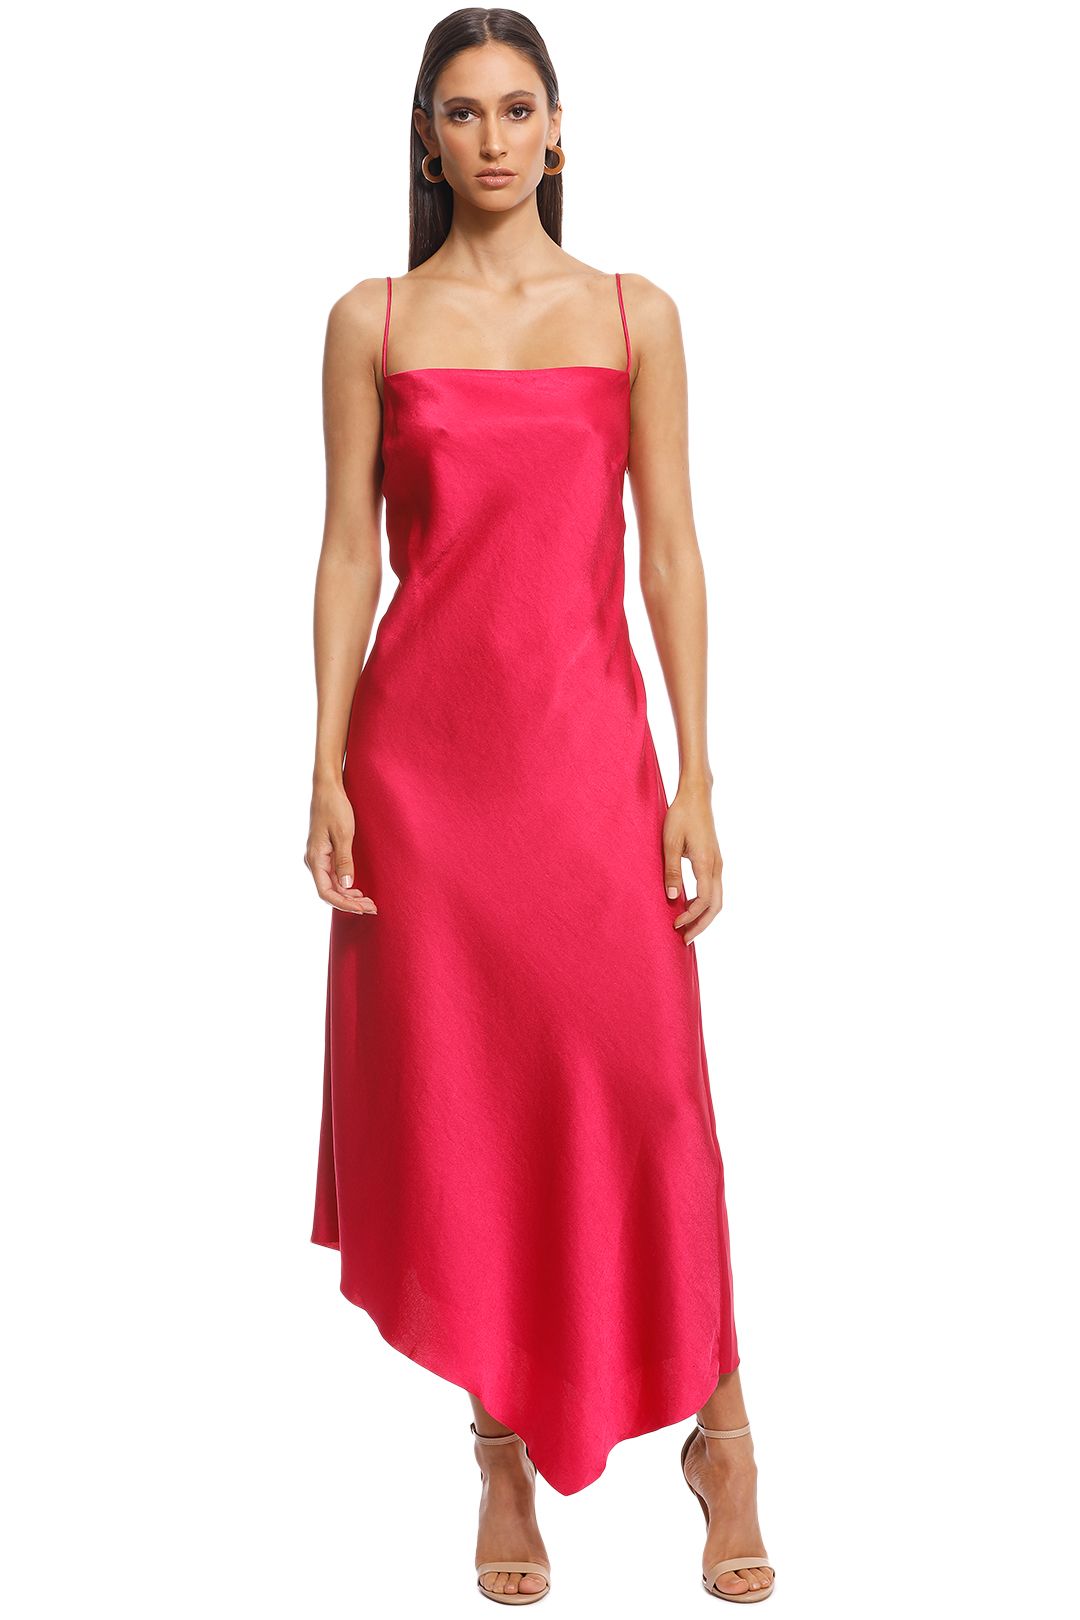 Camilla and Marc - Sirocco Slip Dress - Pink - Front